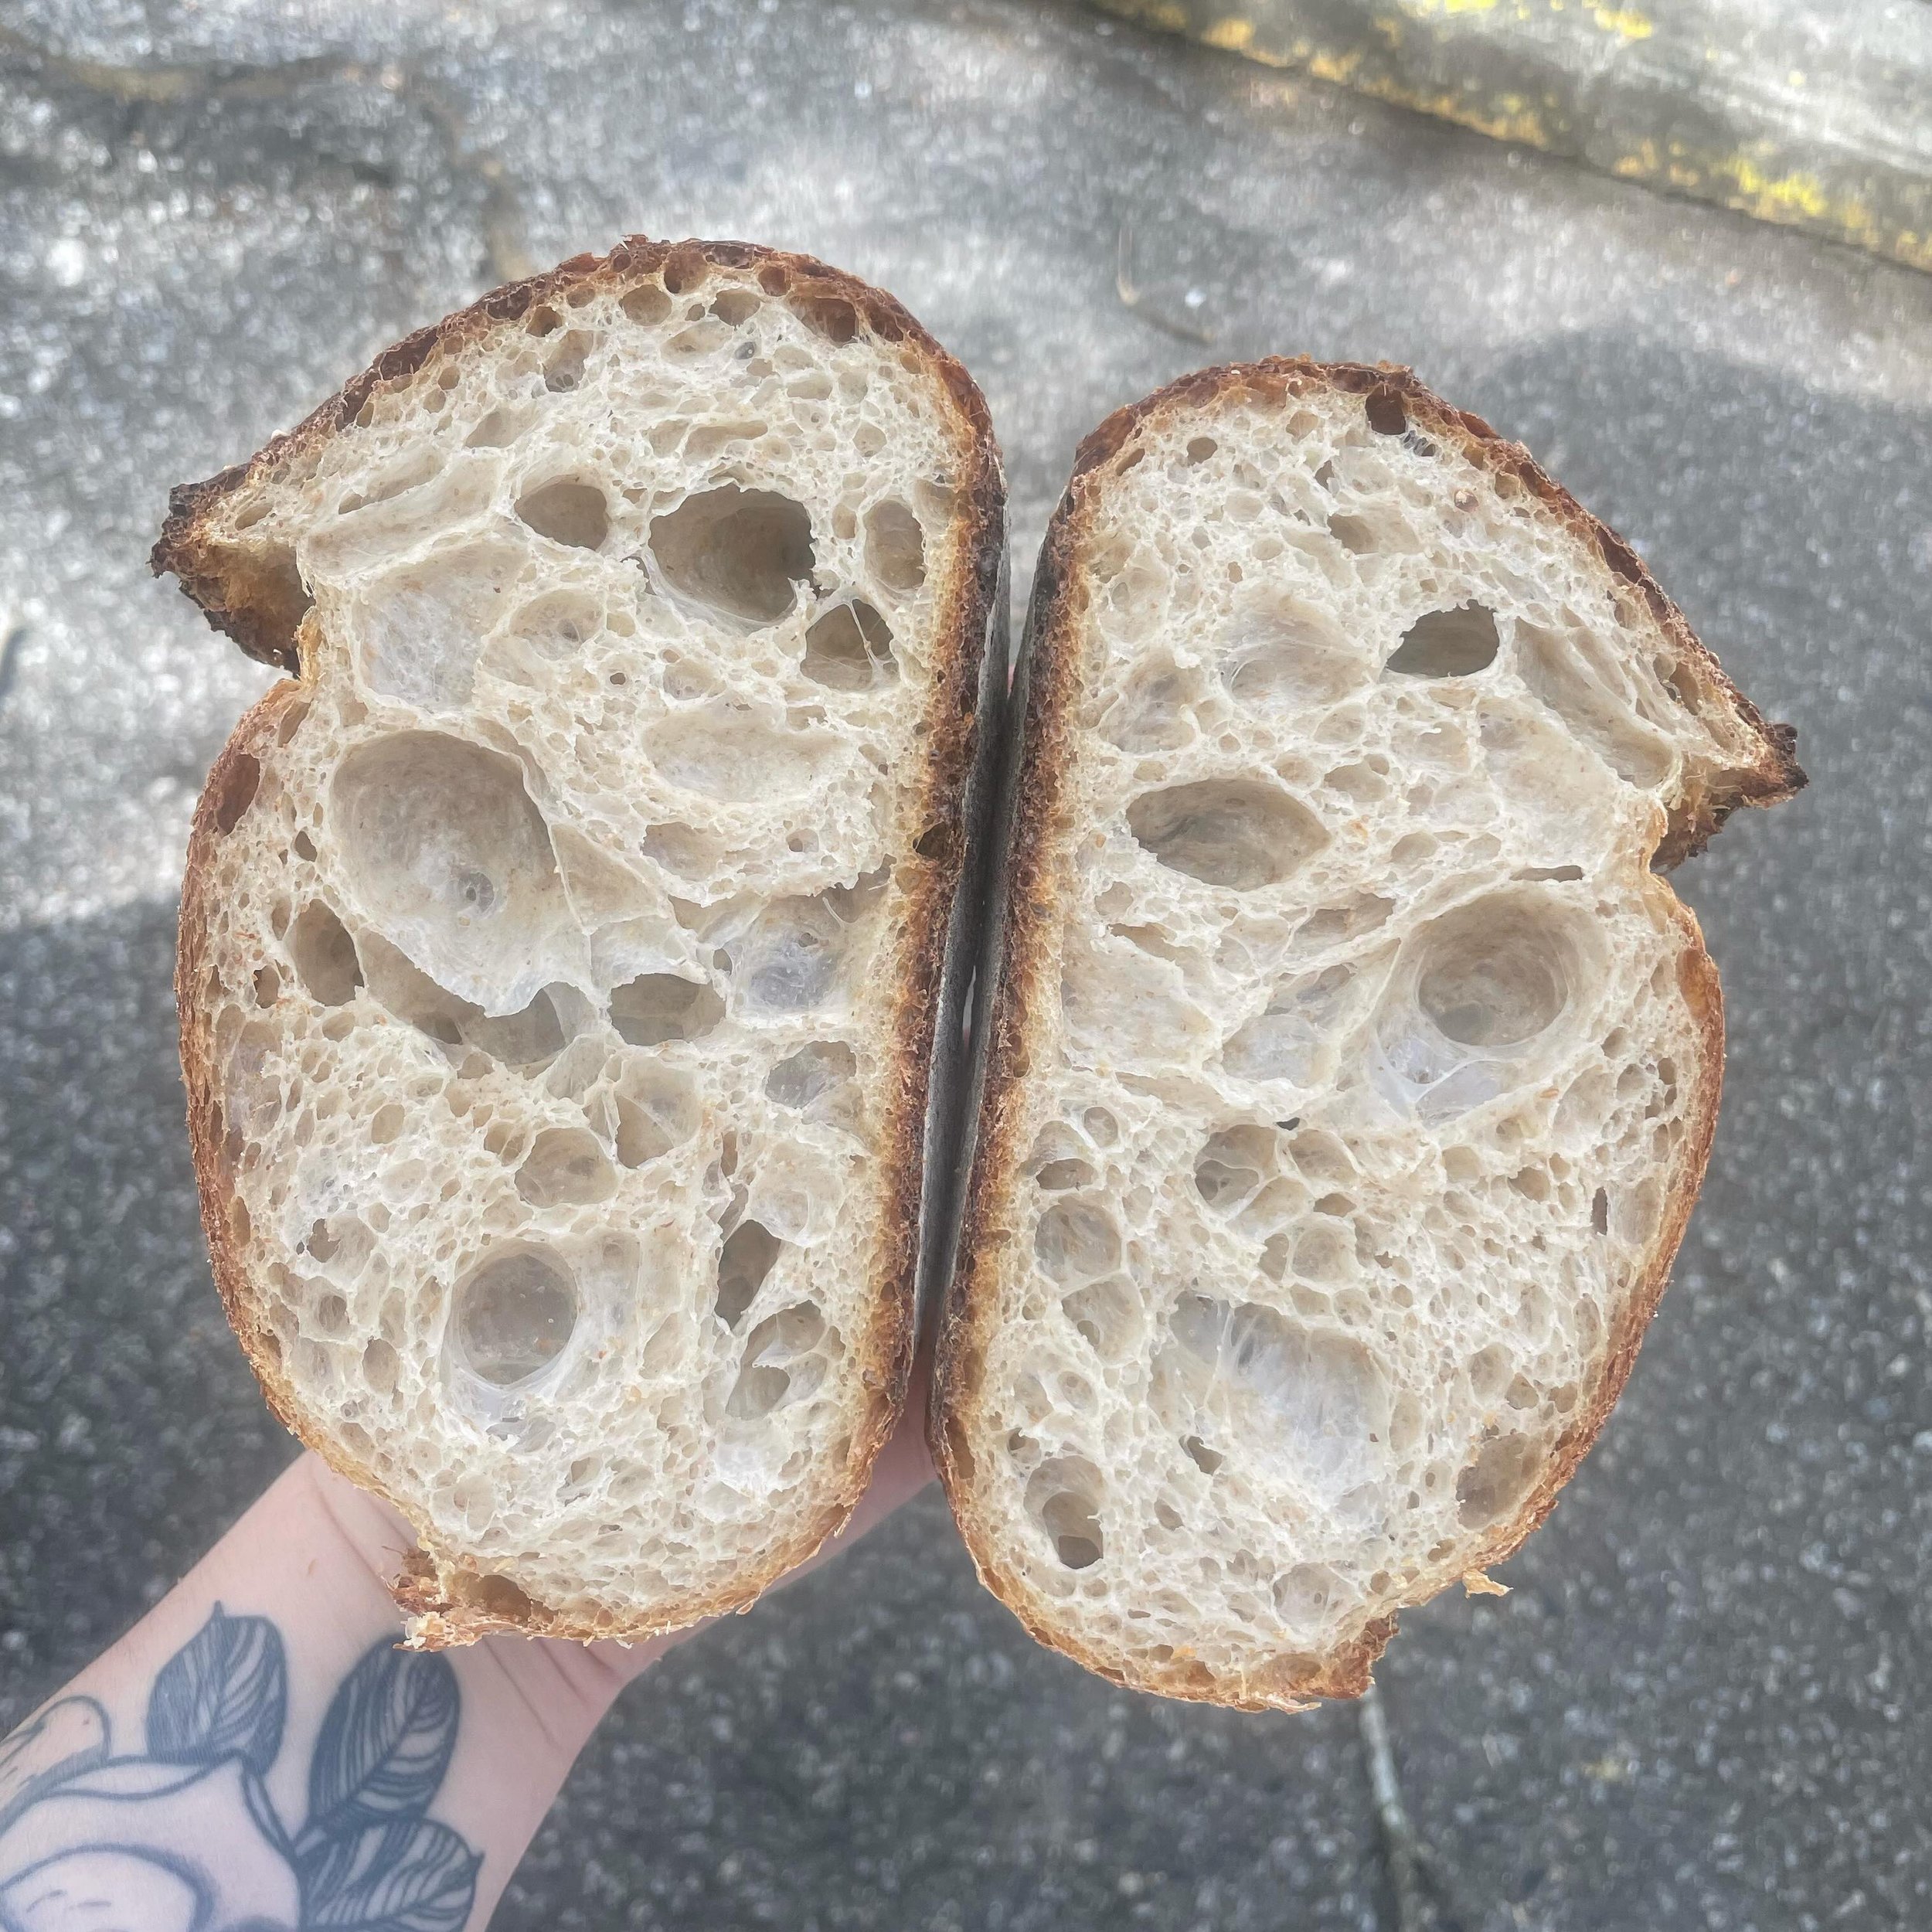 Bread is our love language. 🍞🦋
.
.
.
#vancouverbakery #vancouvercoffee #vancouvercoffeeshop #qualityingredients #bakery #breadhead #sourdough